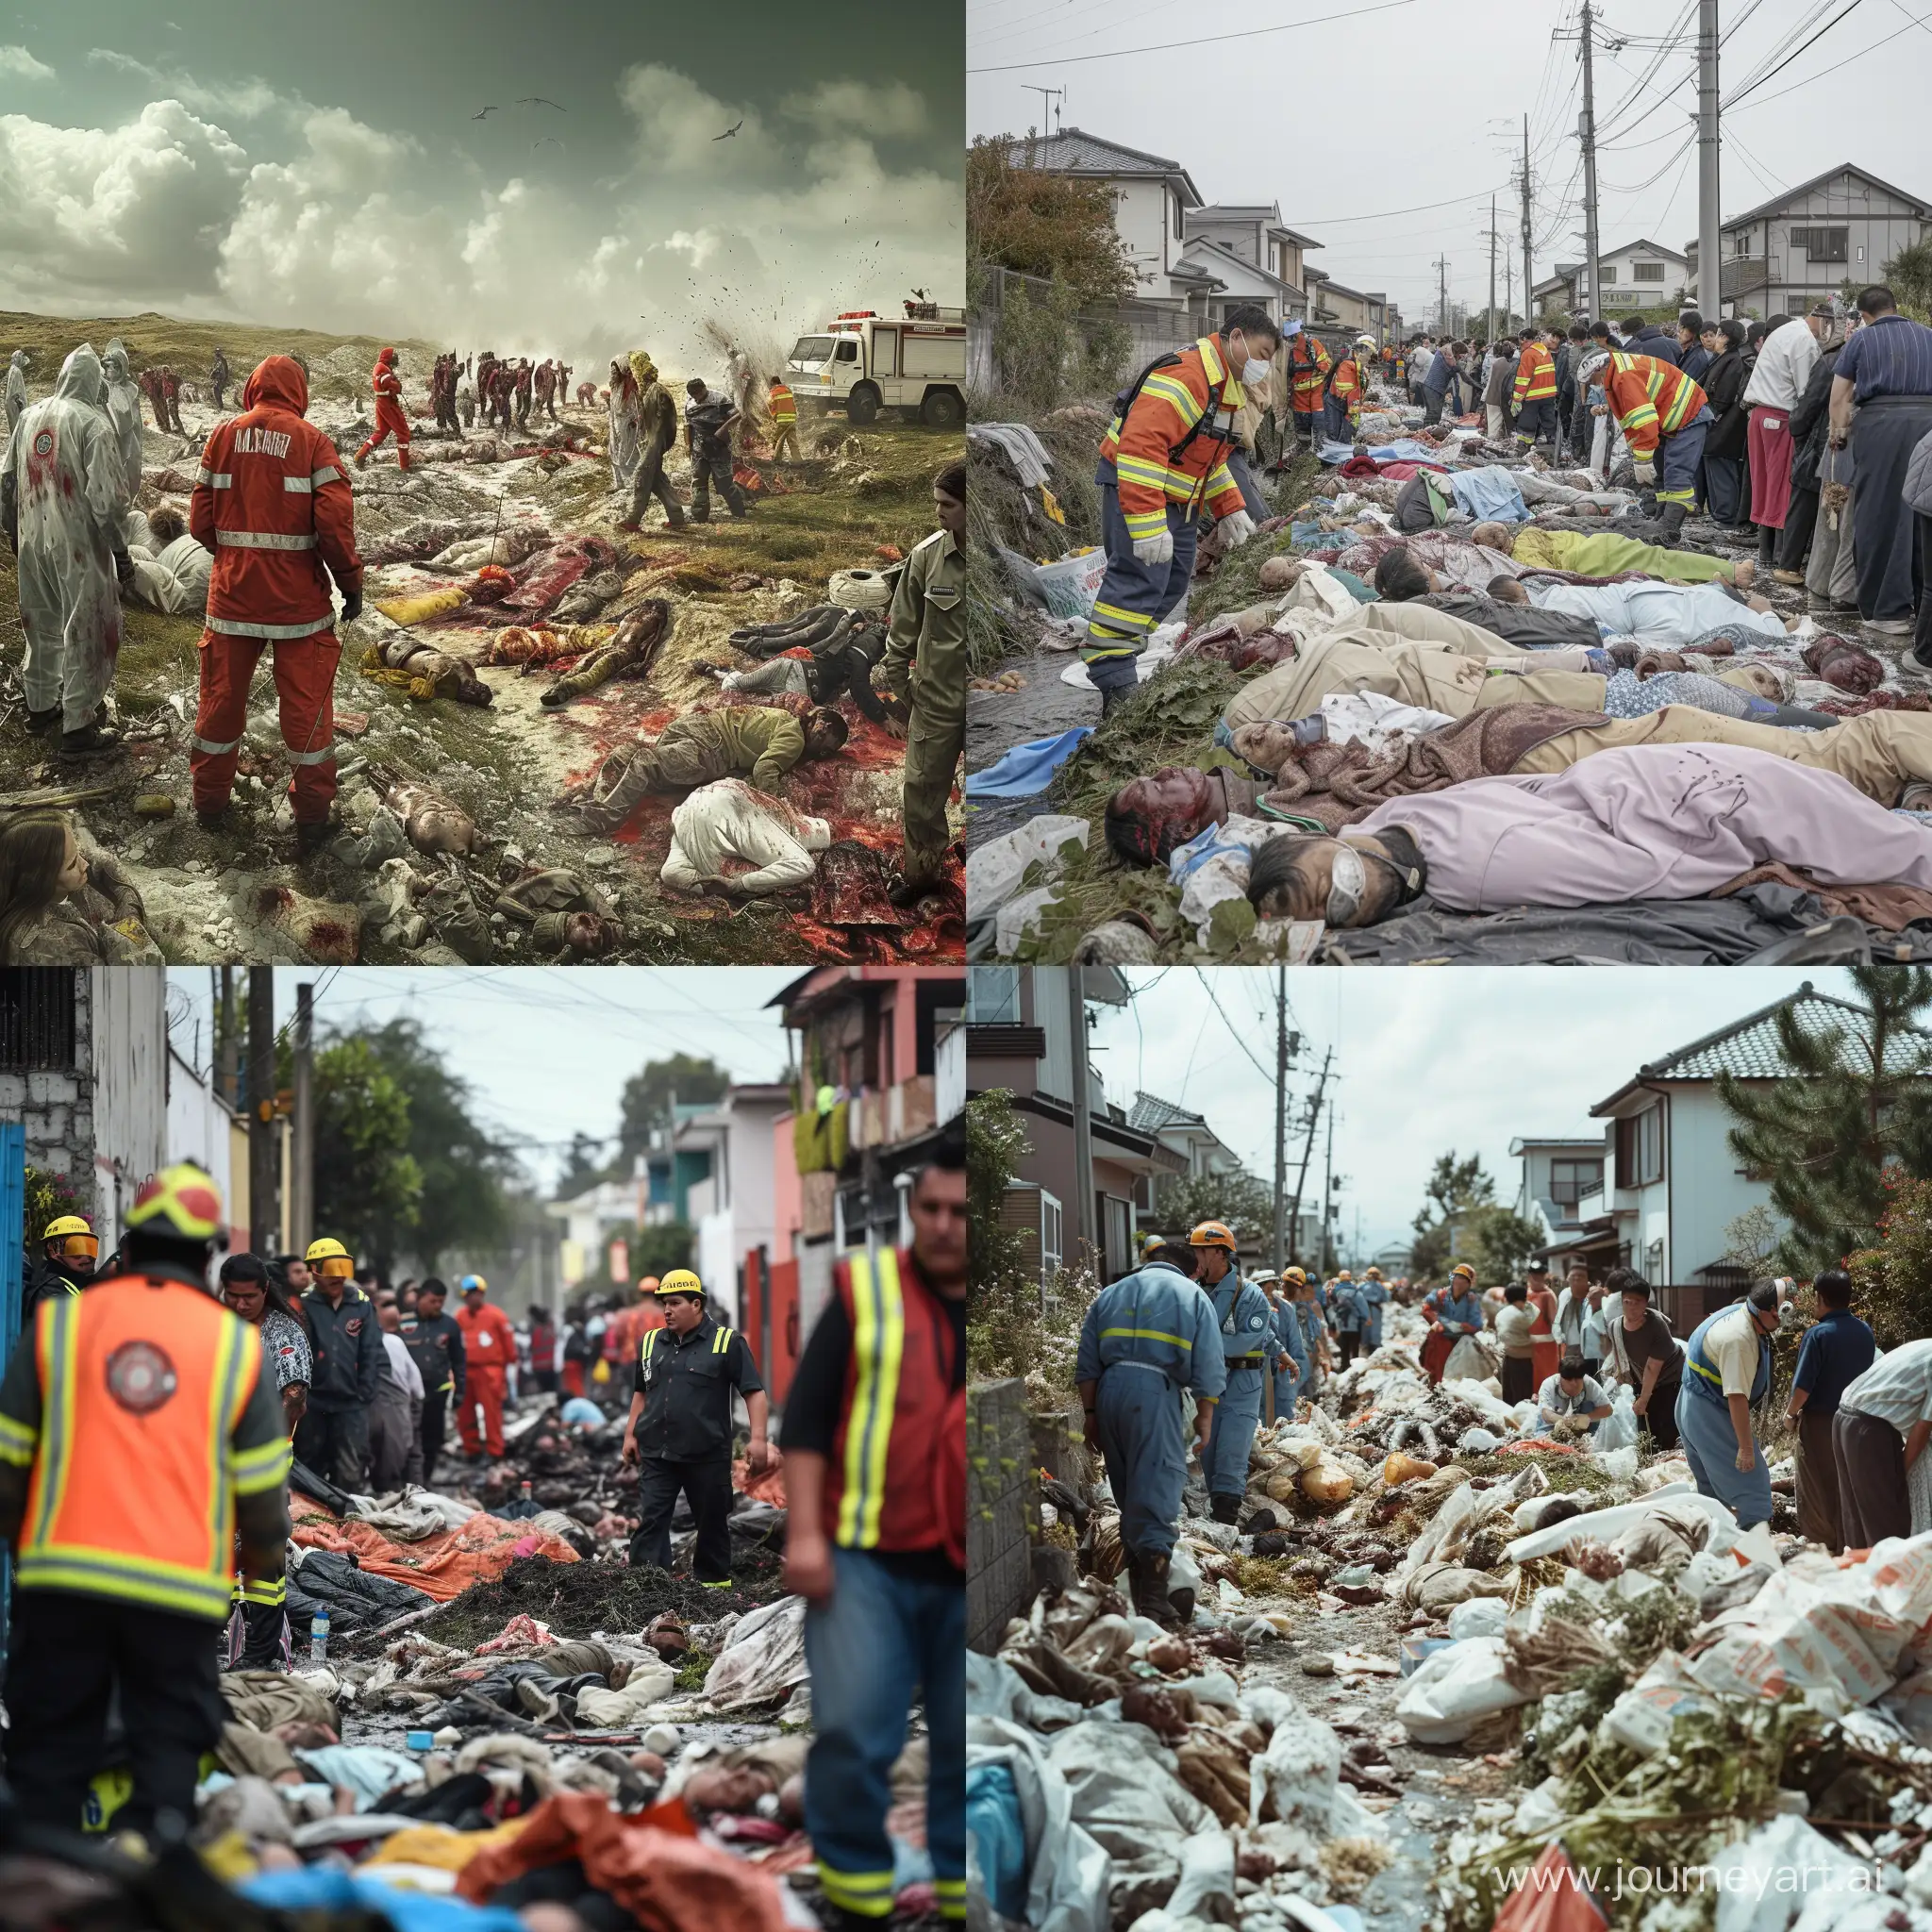 The occurrence of a major disaster or natural disaster and the presence of rescue workers in special clothes and shocked and worried people at the scene and starting to collect corpses in an area and organize them for identification.